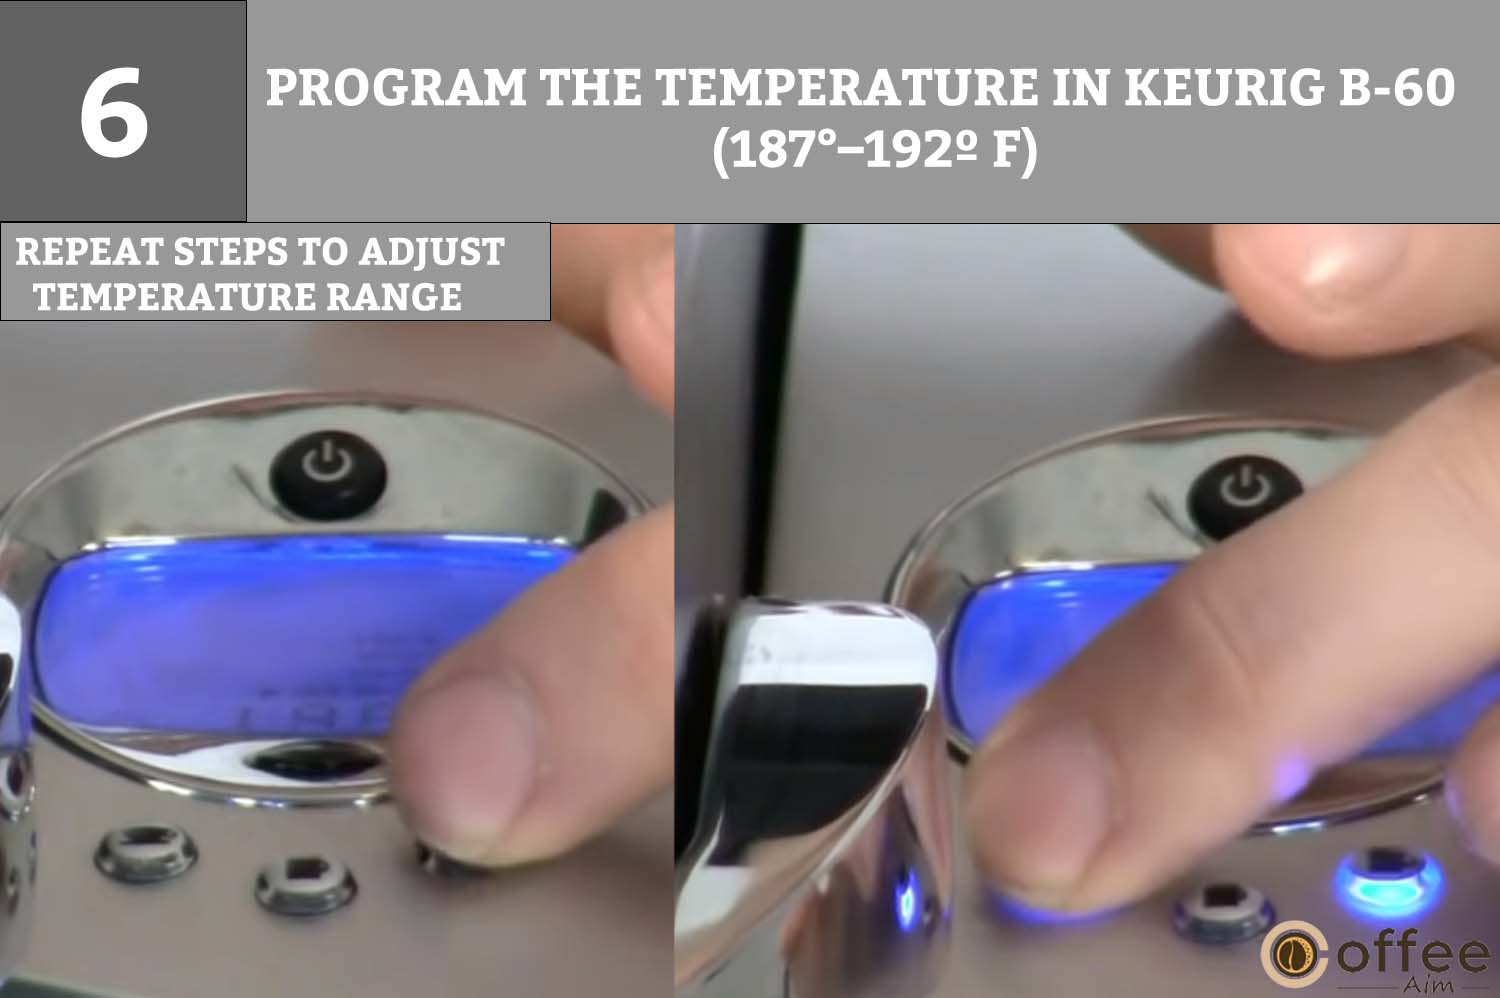 To adjust the temperature again, repeat the steps mentioned earlier. The range for temperature settings is between 187°F to 192°F.